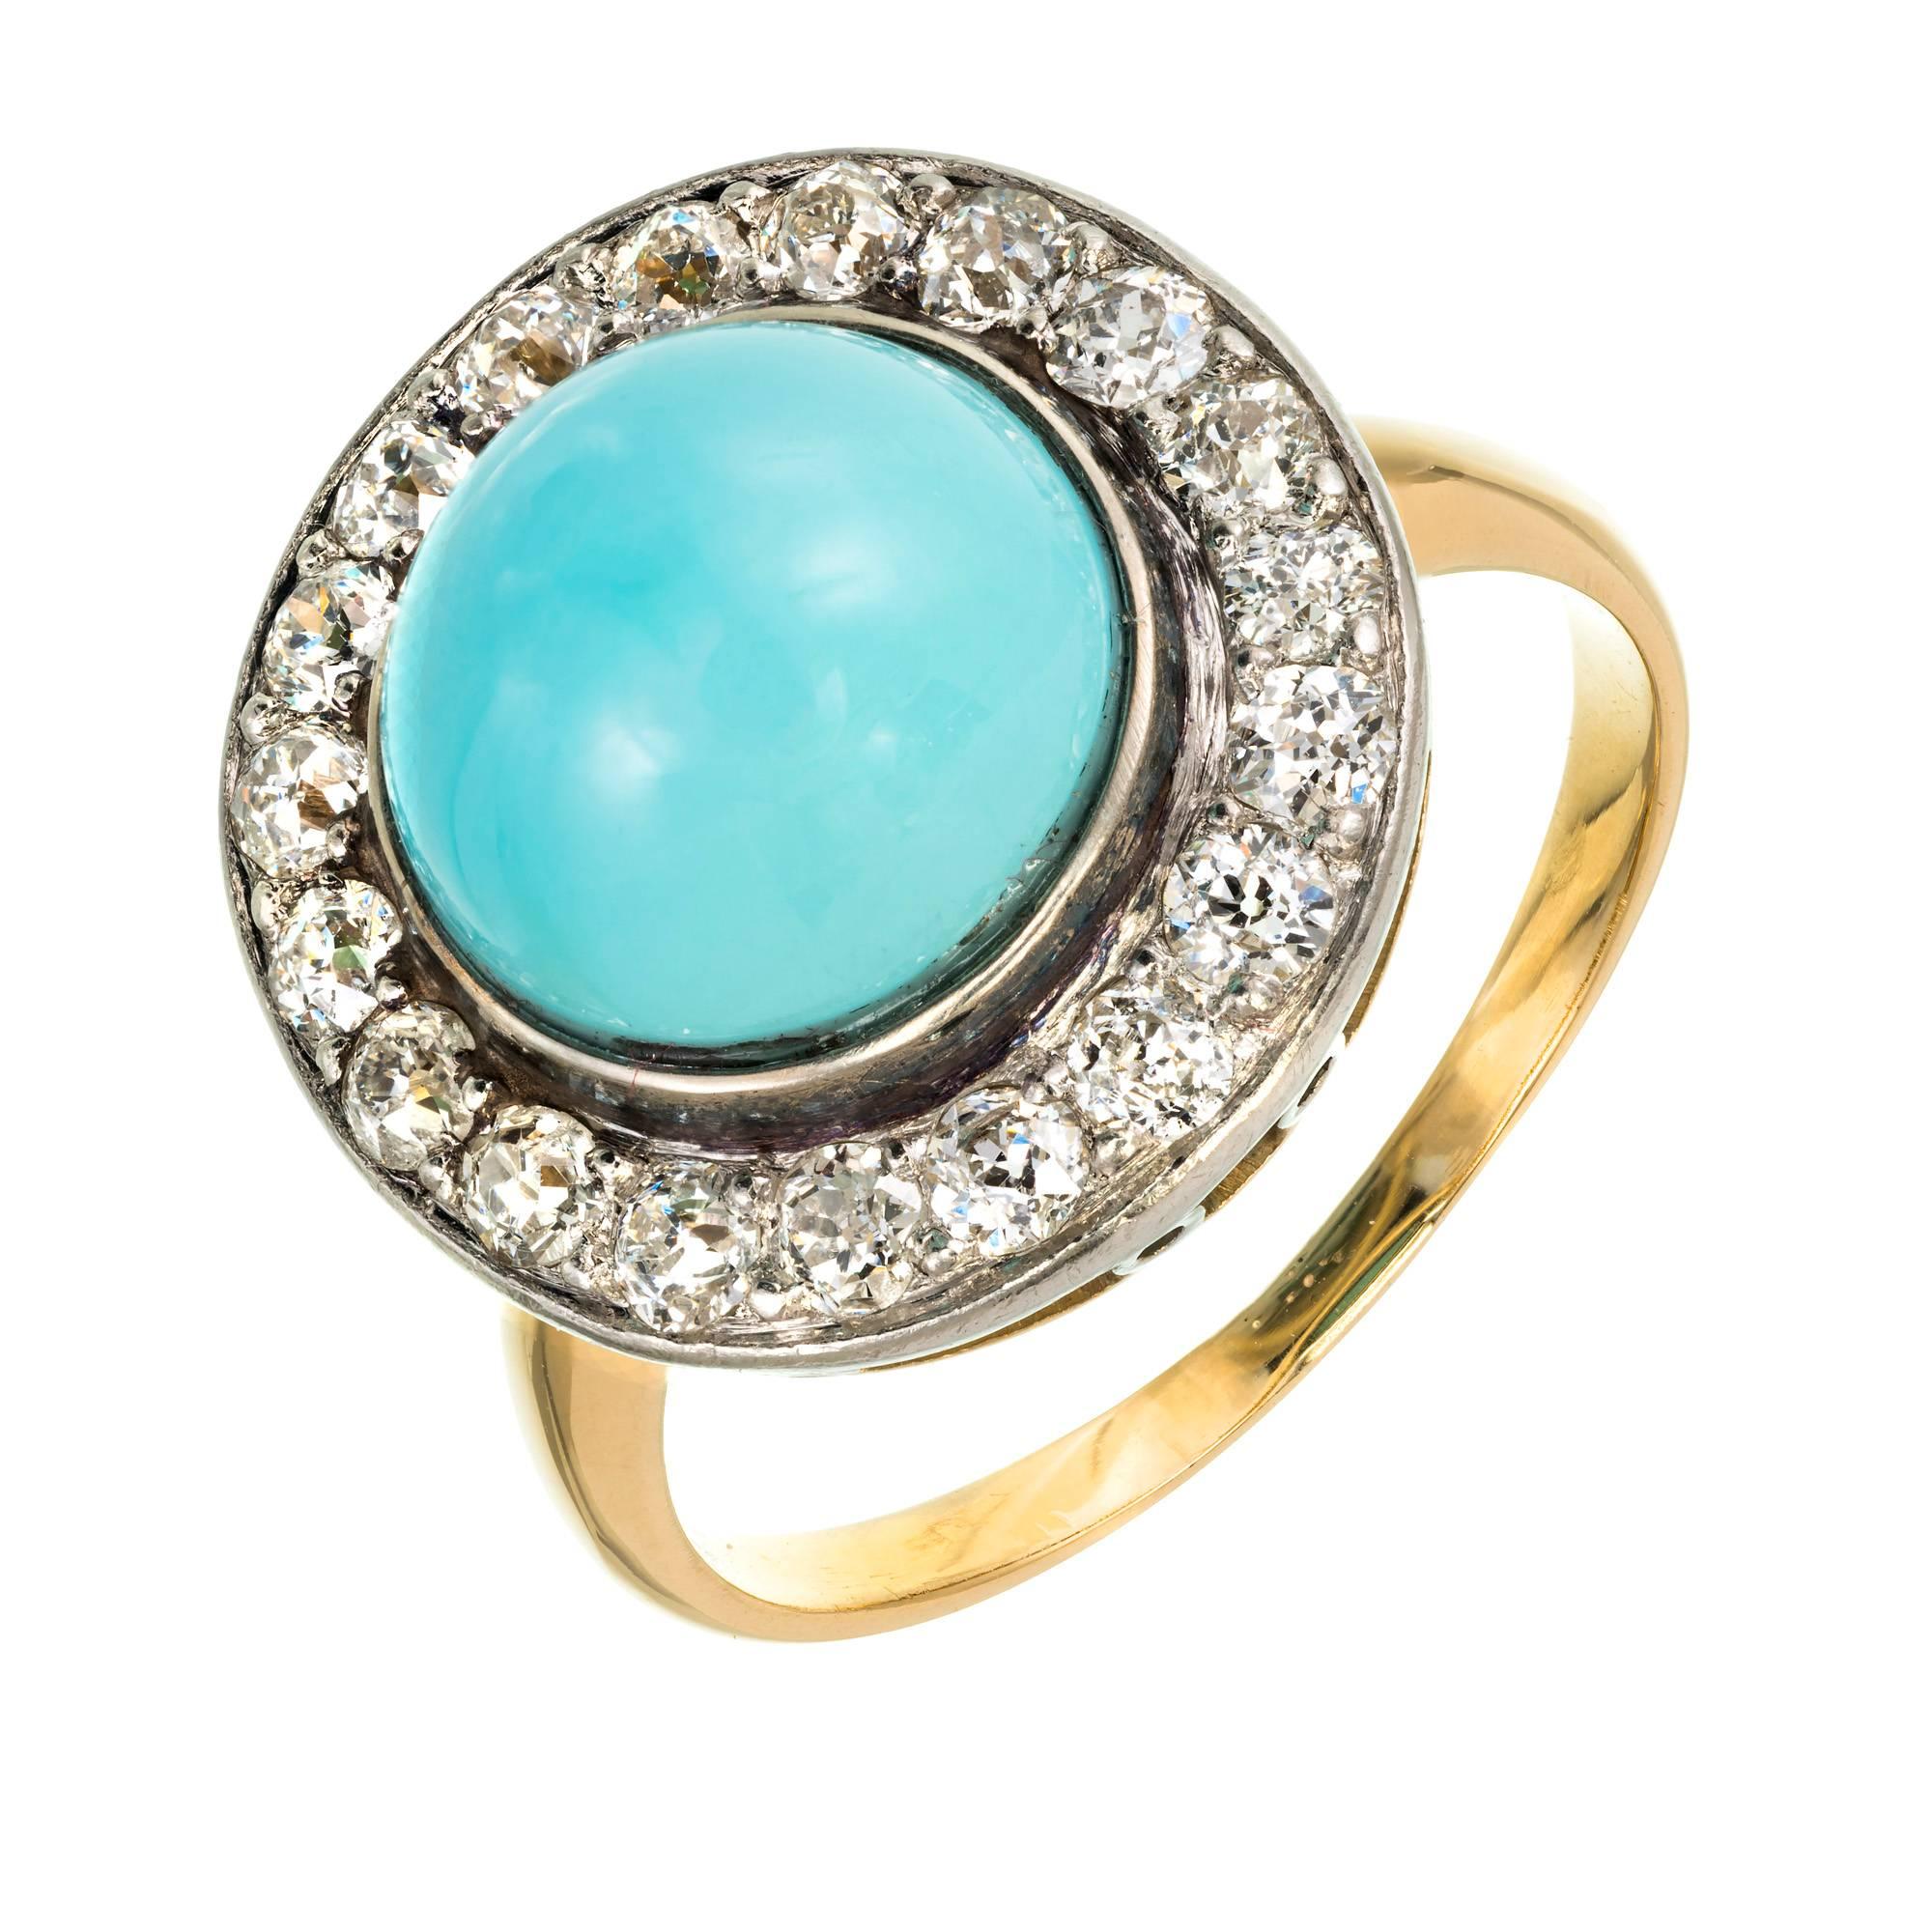 Natural untreated Persian blue Turquoise round cabochon ring circa 1930. Bright shiny high dome Turquoise surrounded by bright sparkly old European cut Diamonds in a handmade Platinum top on a 14k yellow gold ring.

1 round cabochon greenish blue